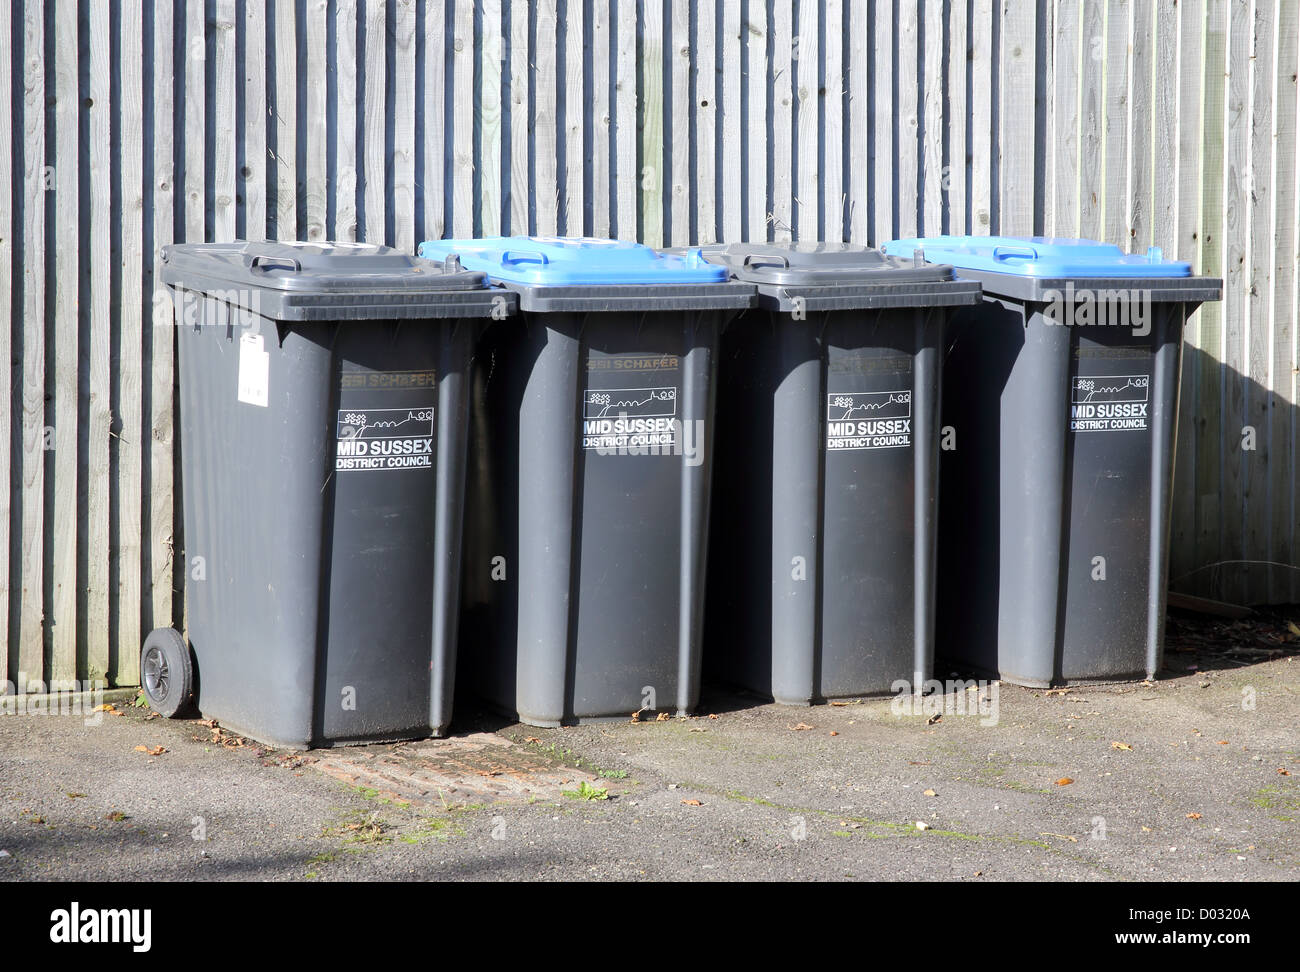 rubbish bins owned by mid sussex district council Stock Photo